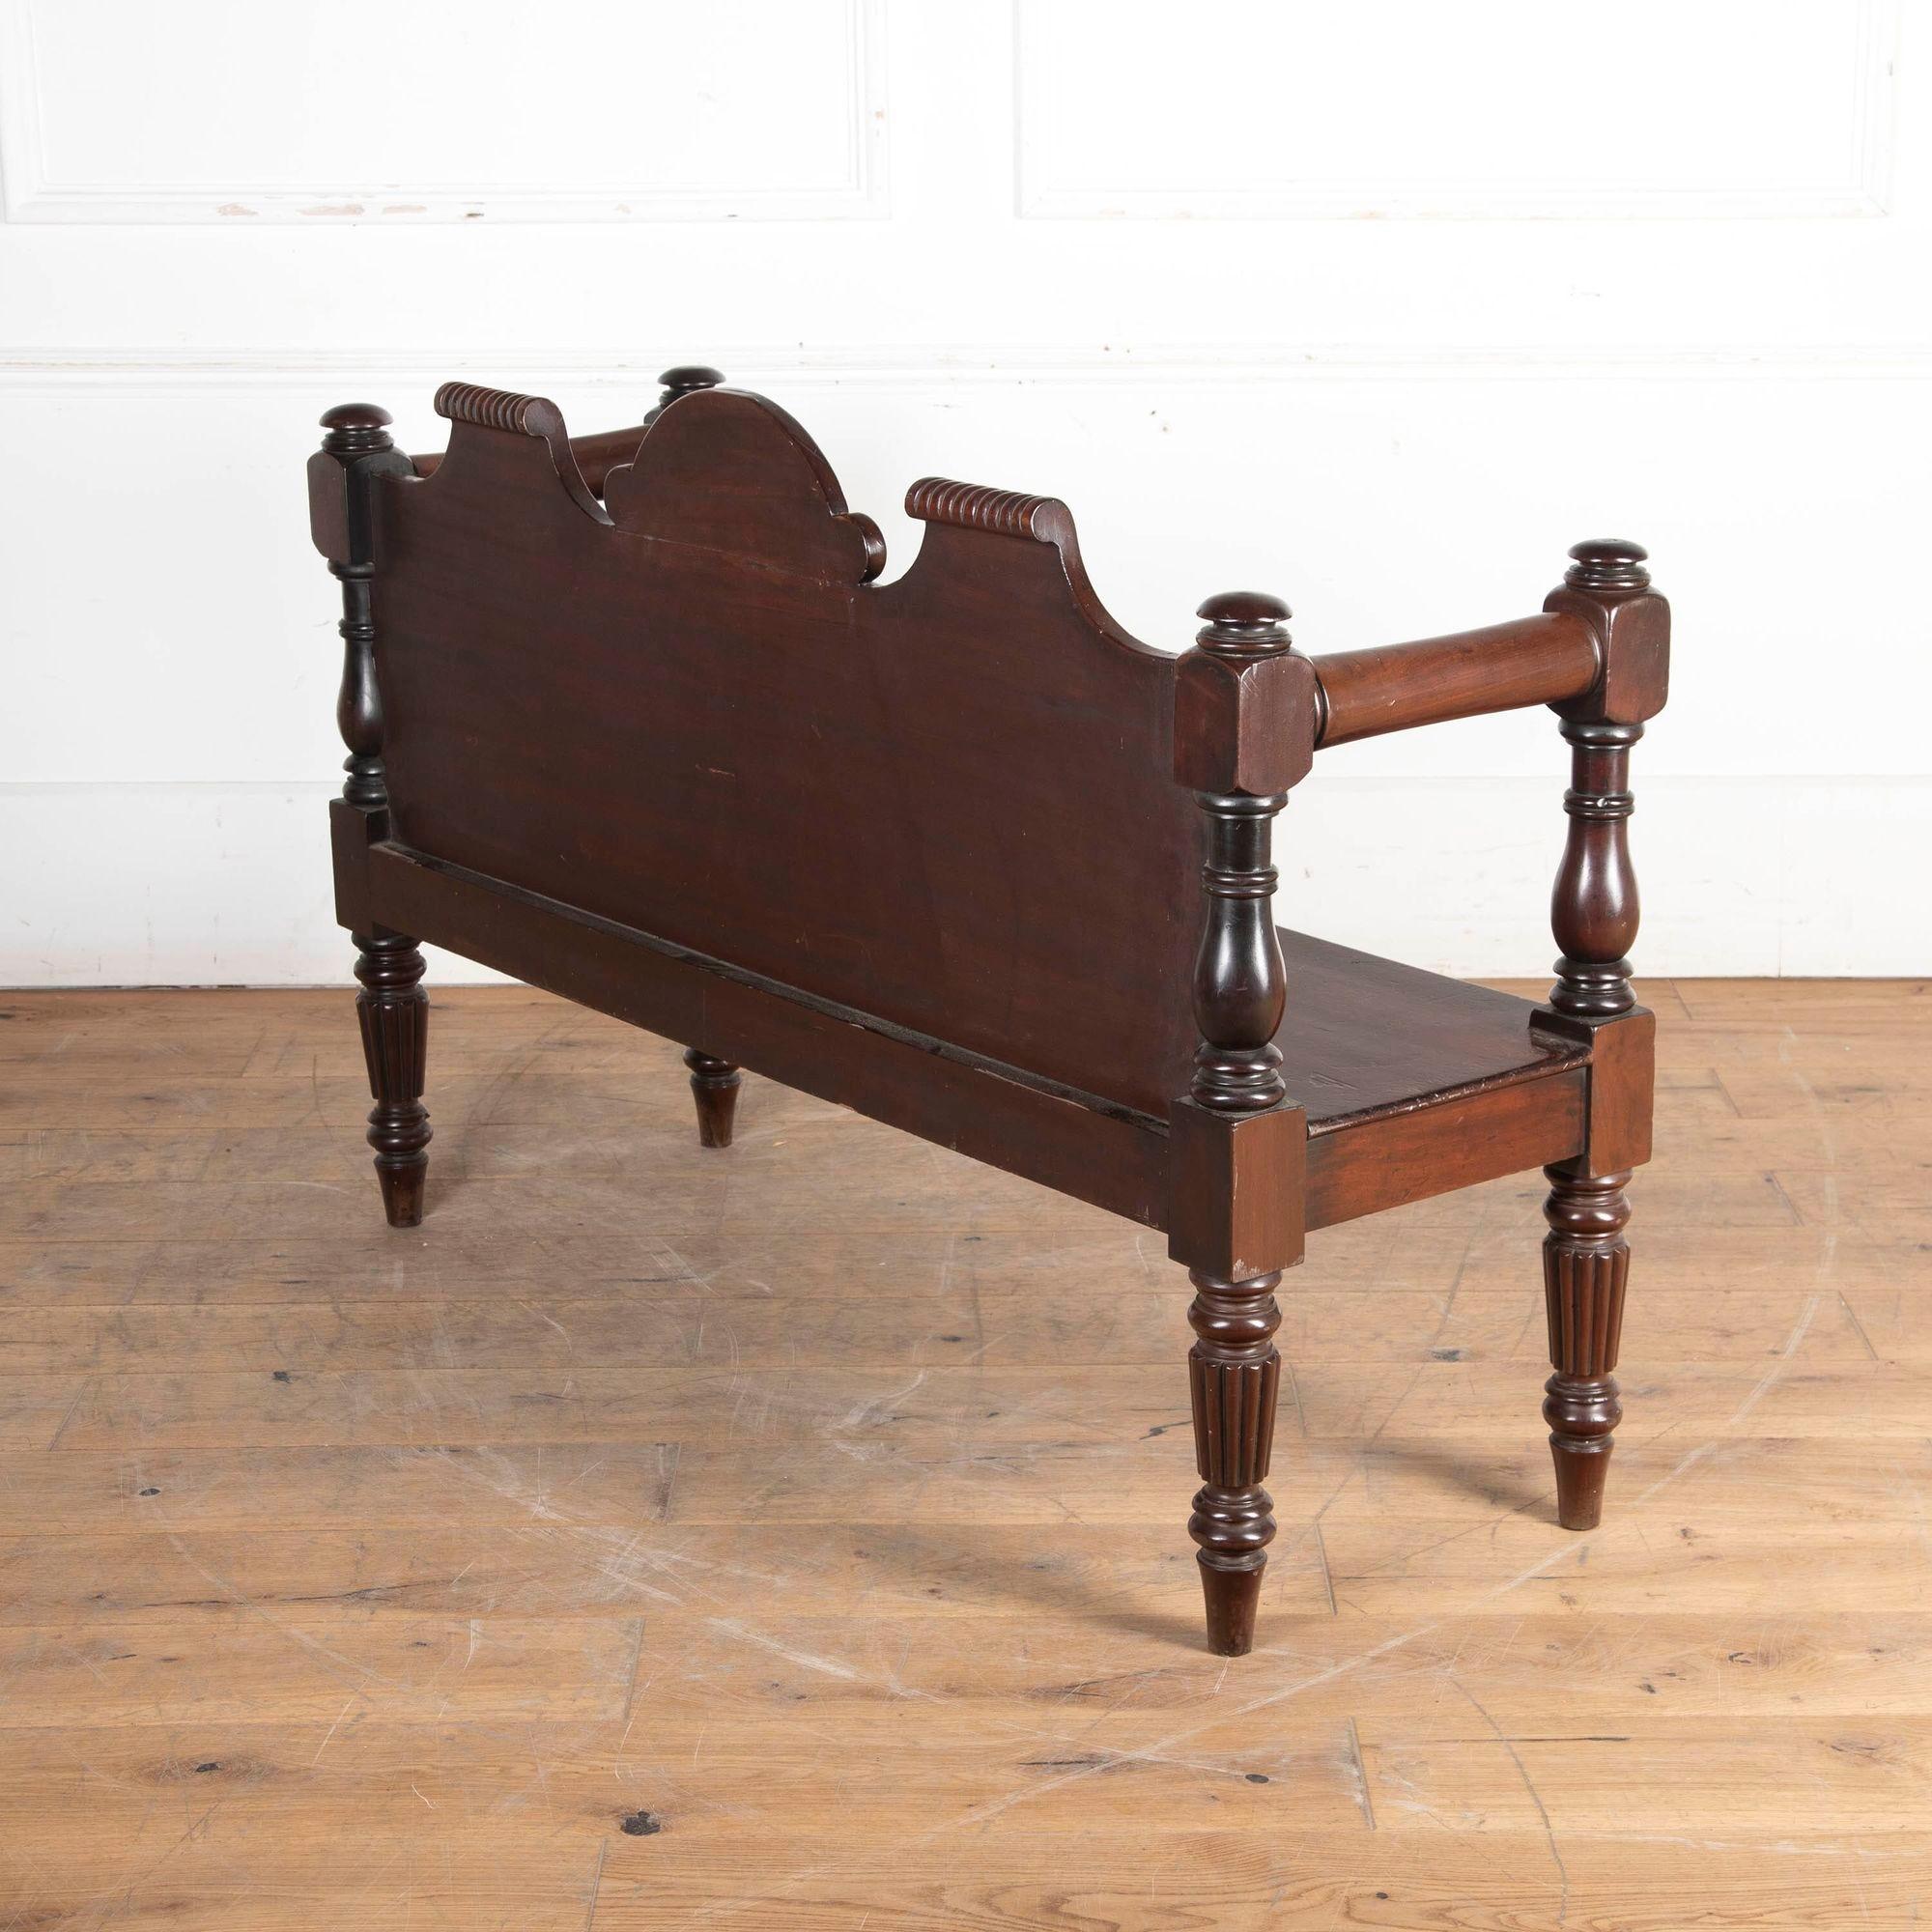 Early 19th Century Irish mahogany hall bench.
With fantastic carving on the back rest, this bench makes a great decorative bench for any hall space.